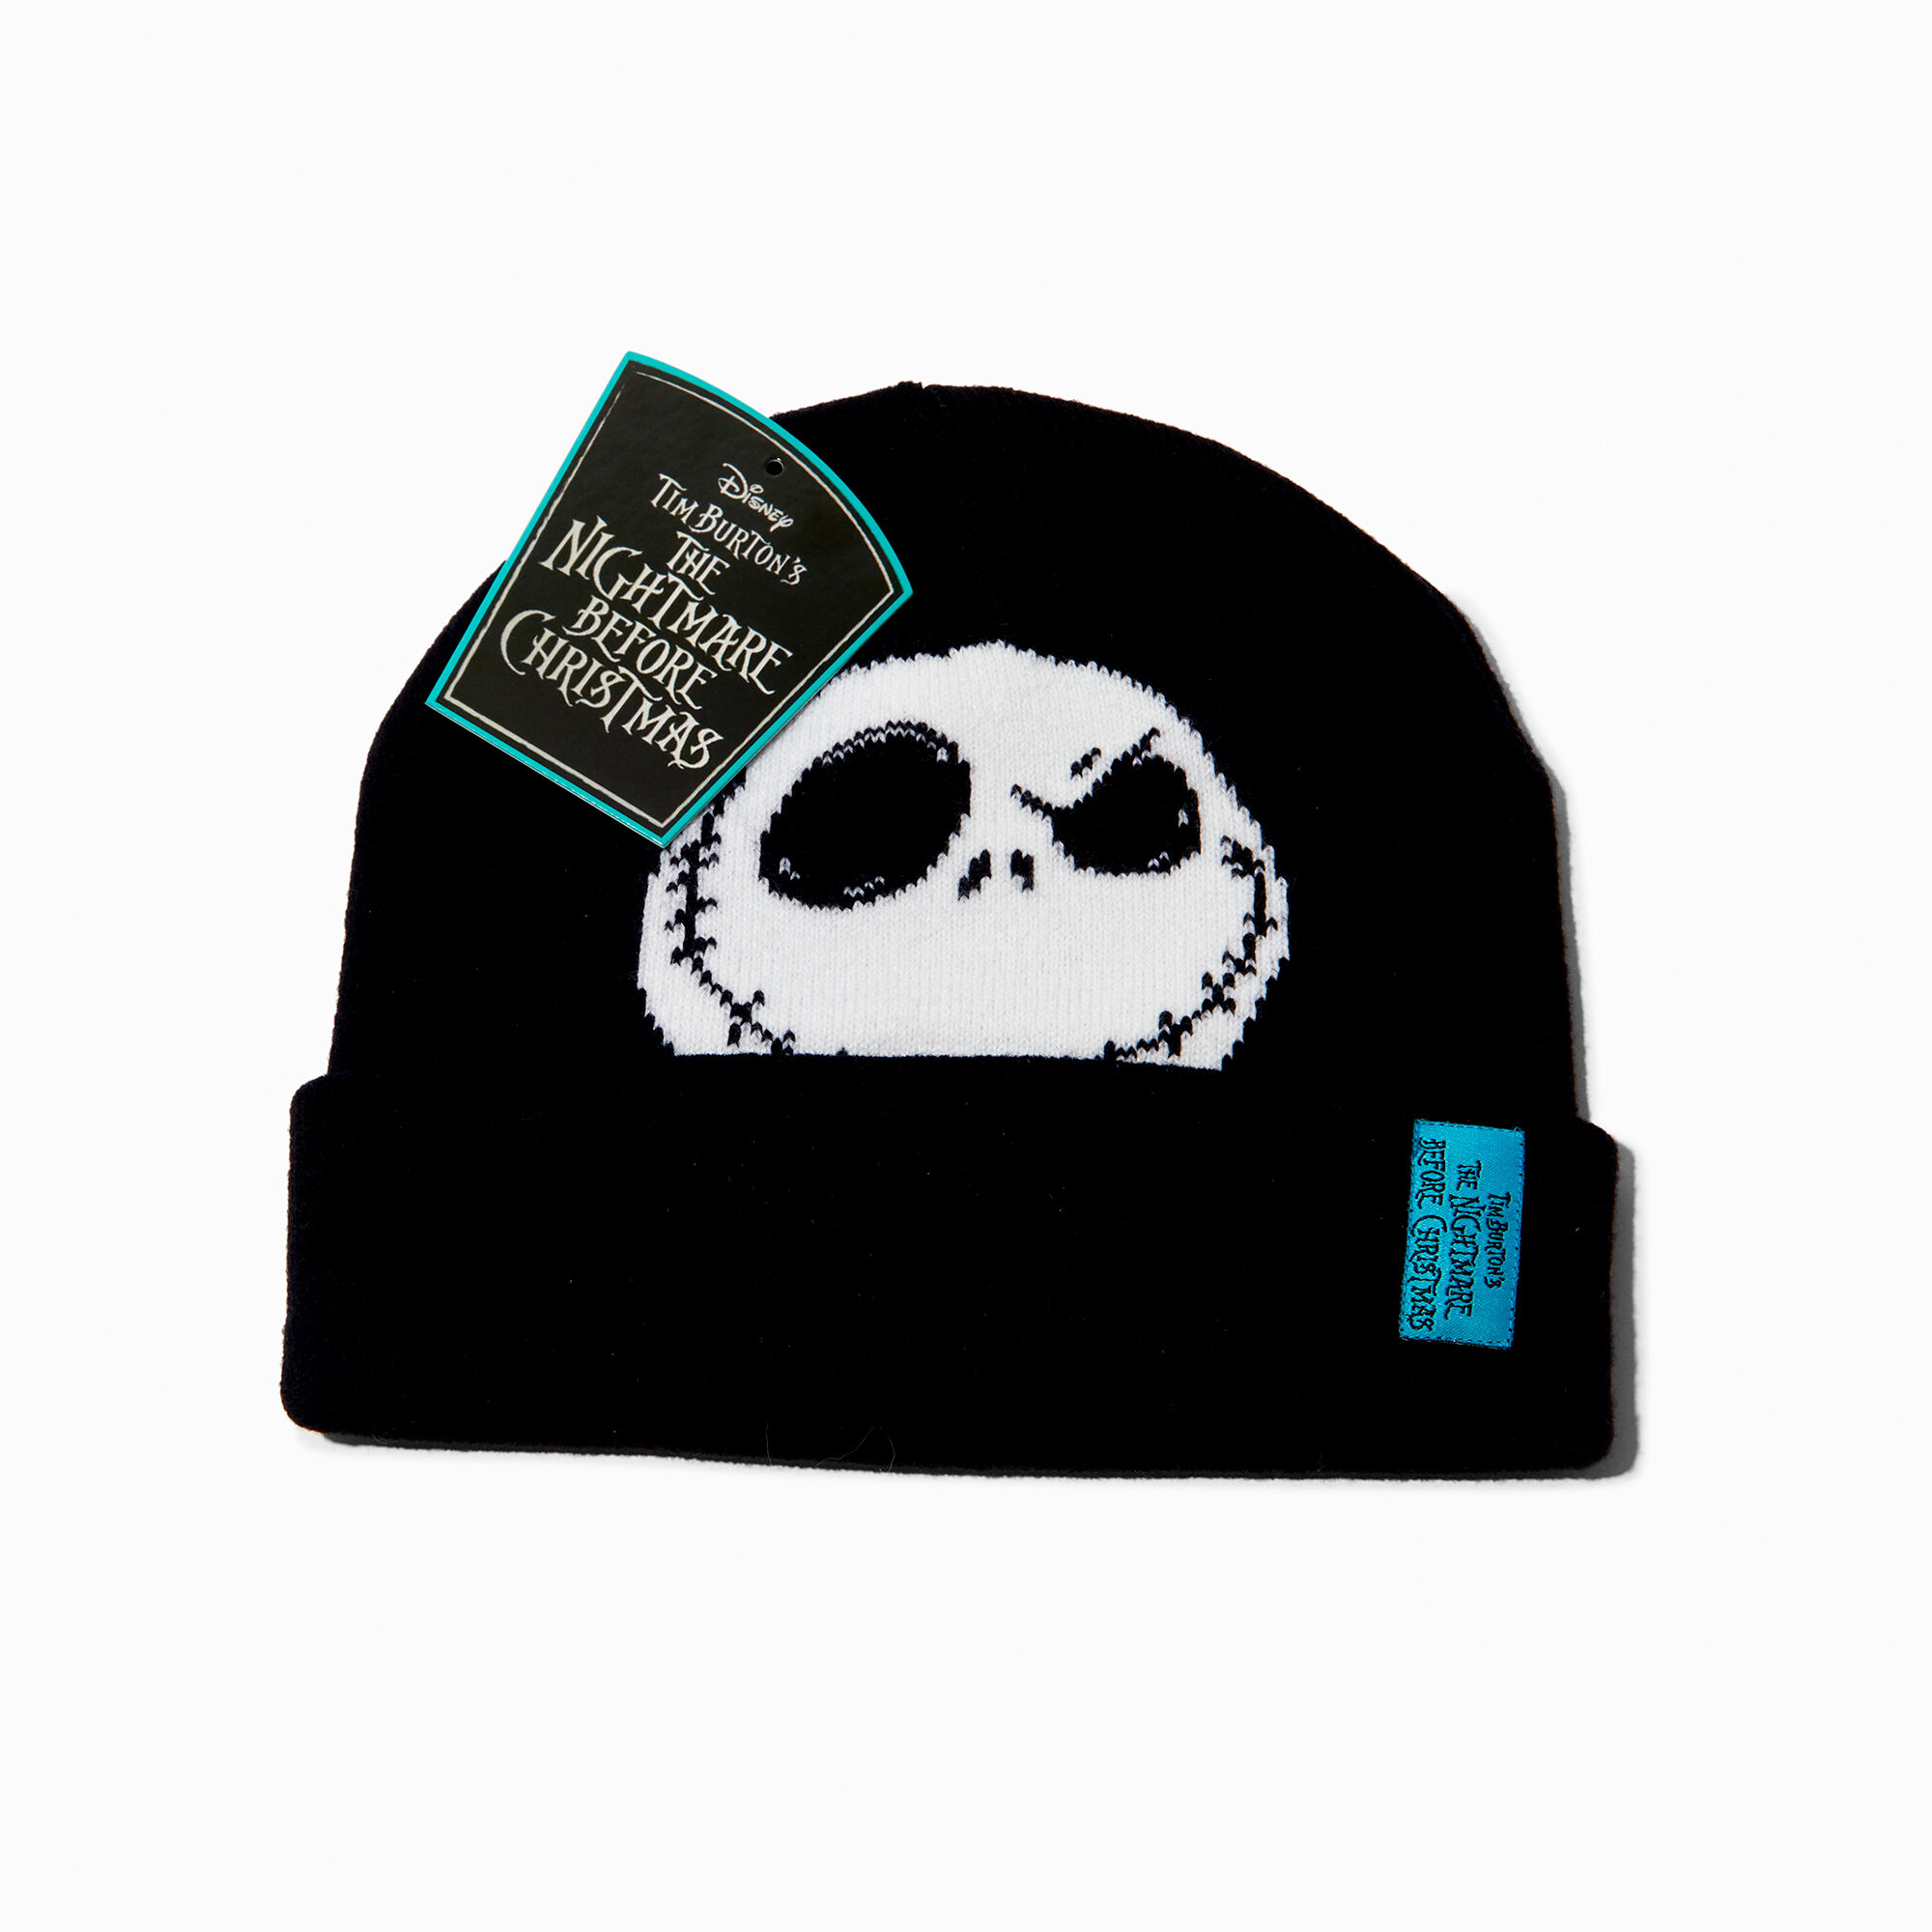 View Claires Disney The Nightmare Before Christmas Beanie Hat information